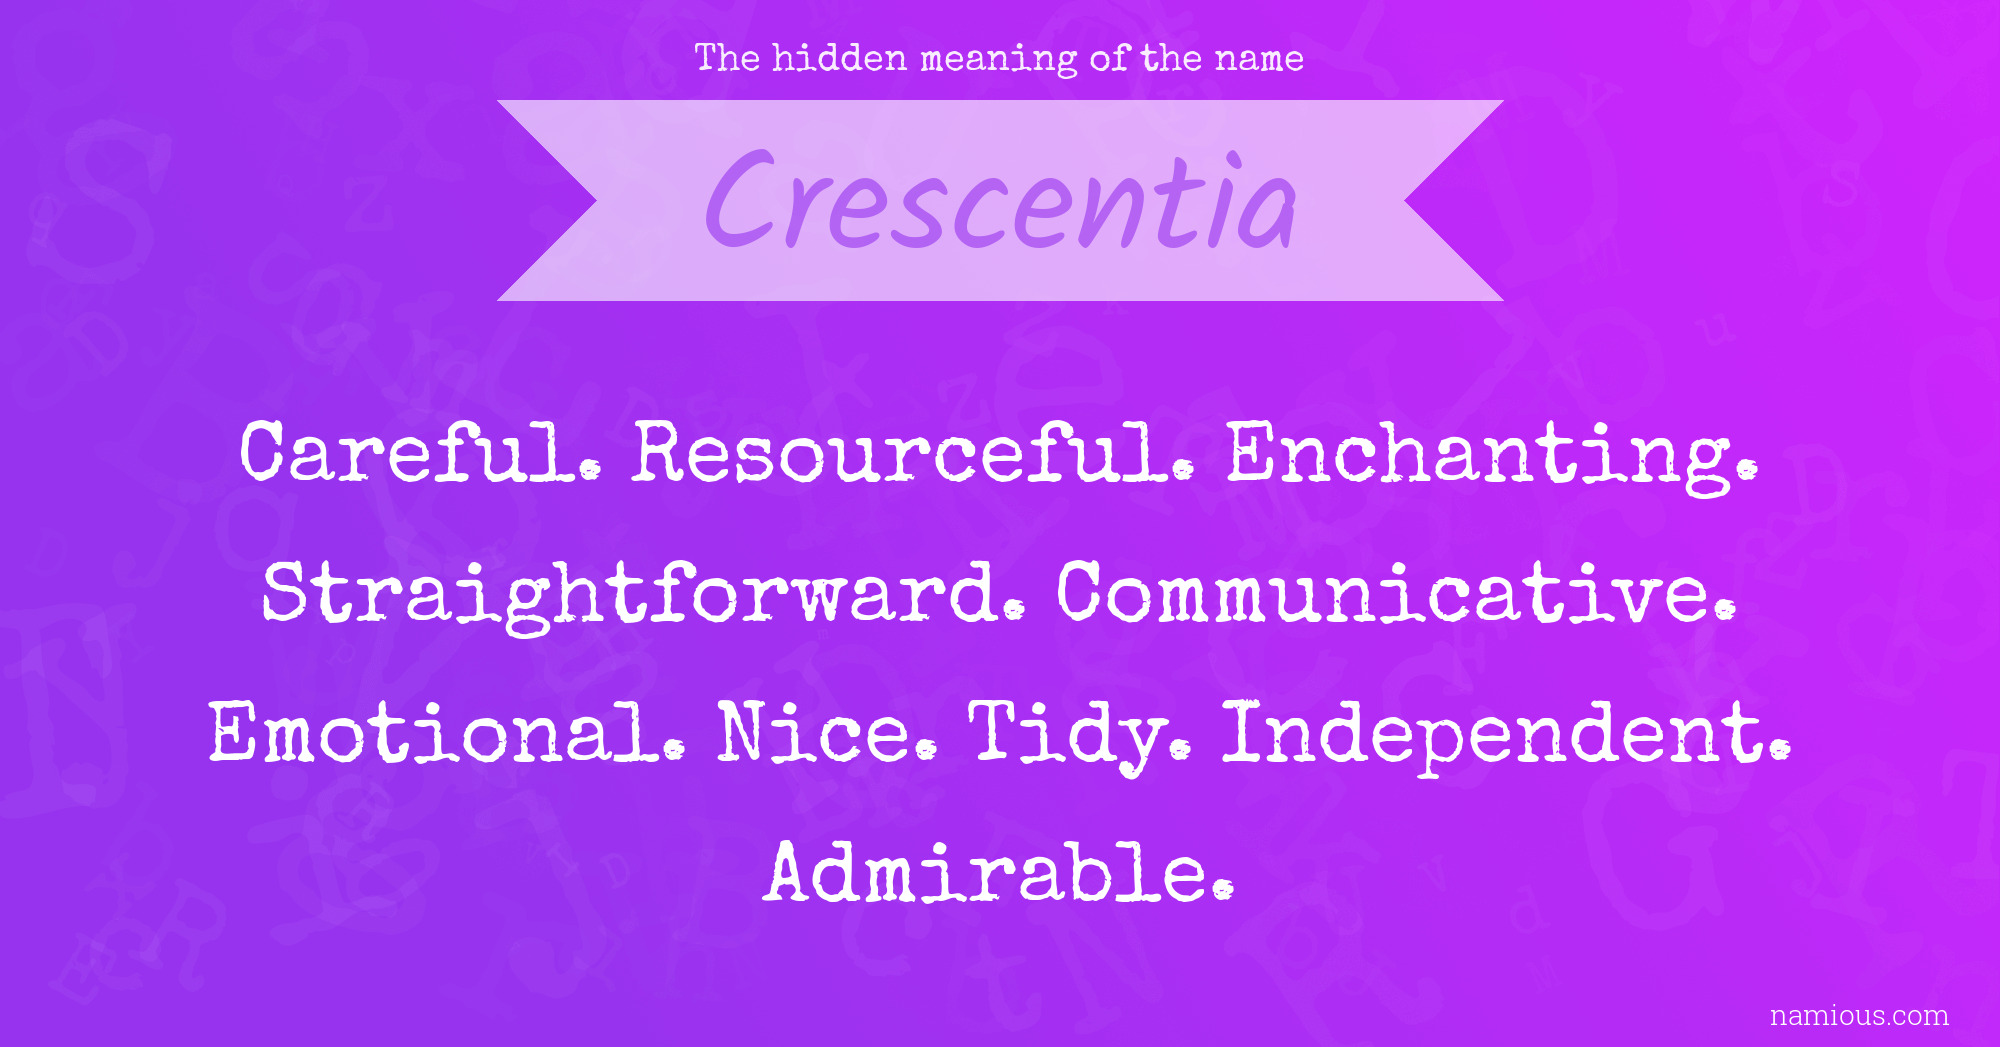 The hidden meaning of the name Crescentia